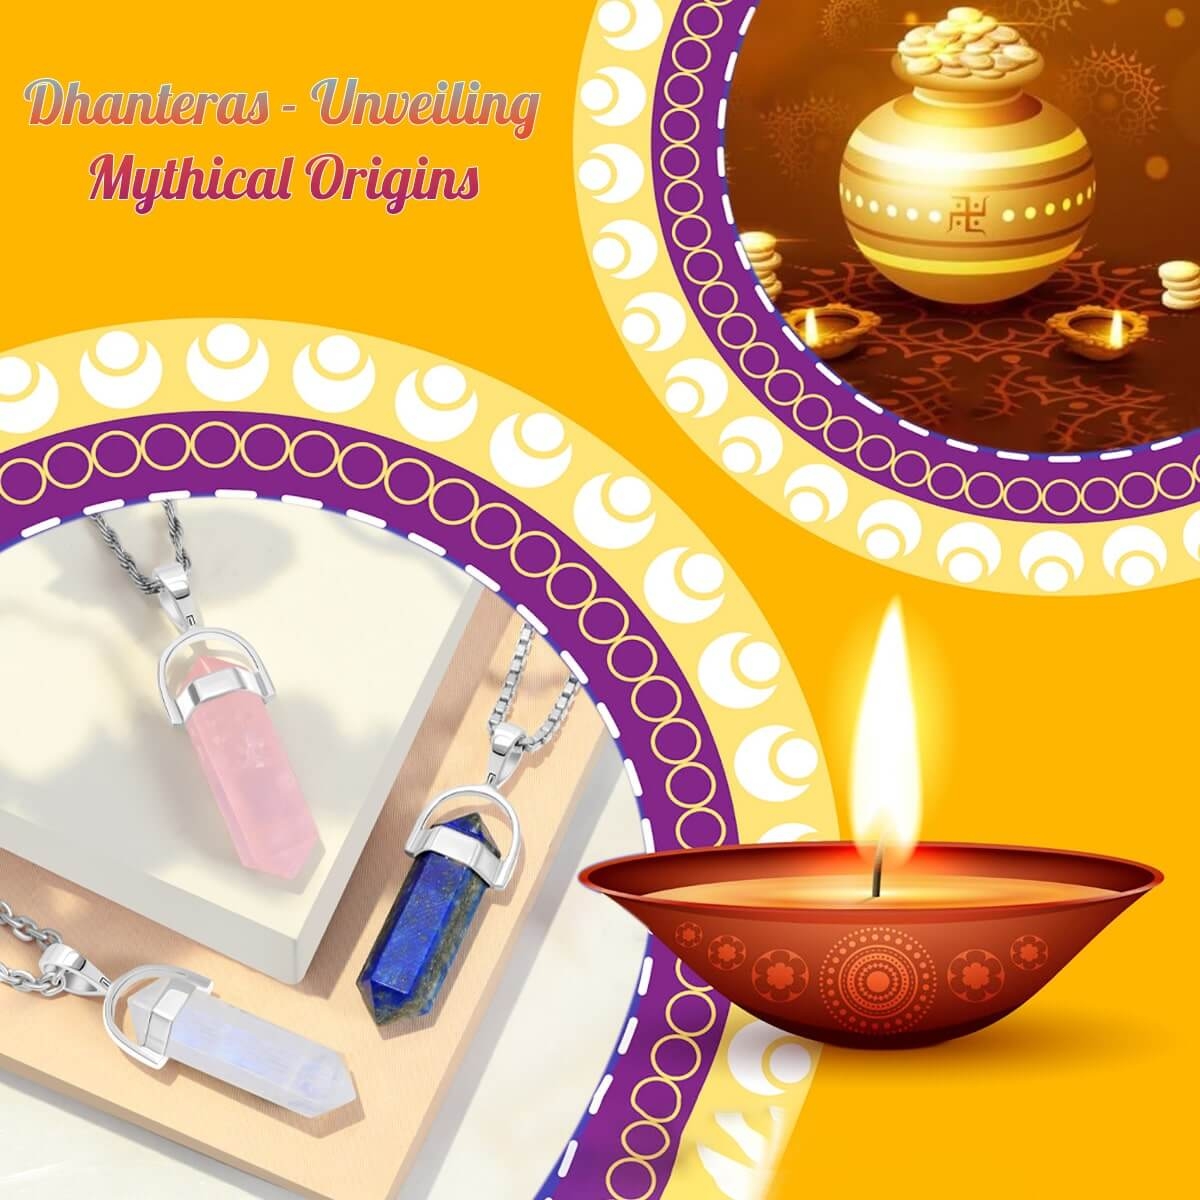 Mythological Roots of this Dhanteras